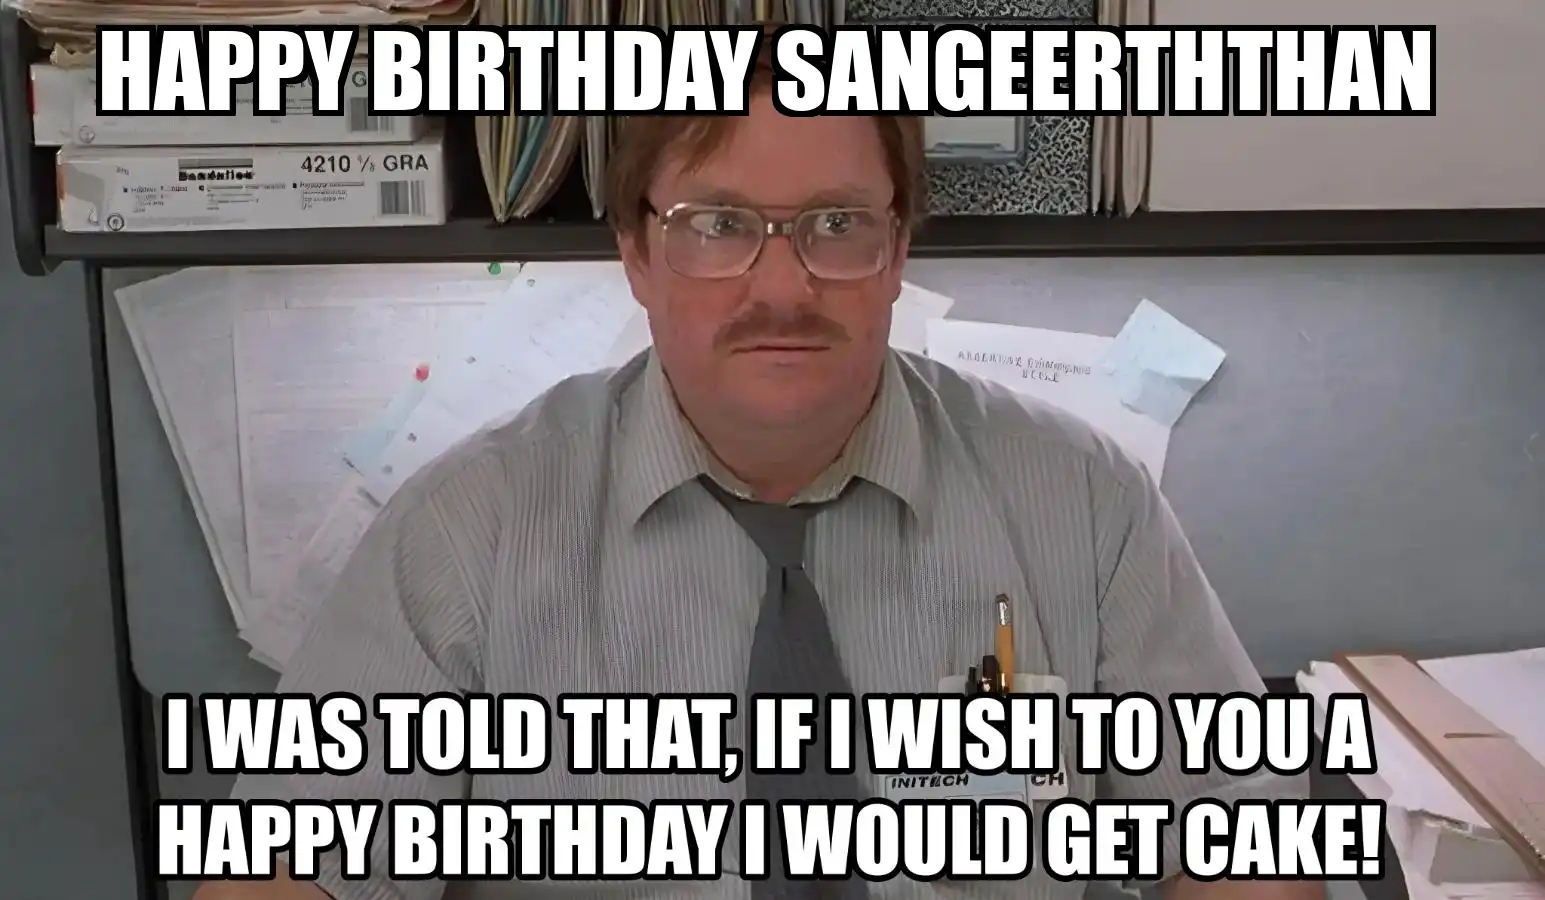 Happy Birthday Sangeerththan I Would Get A Cake Meme